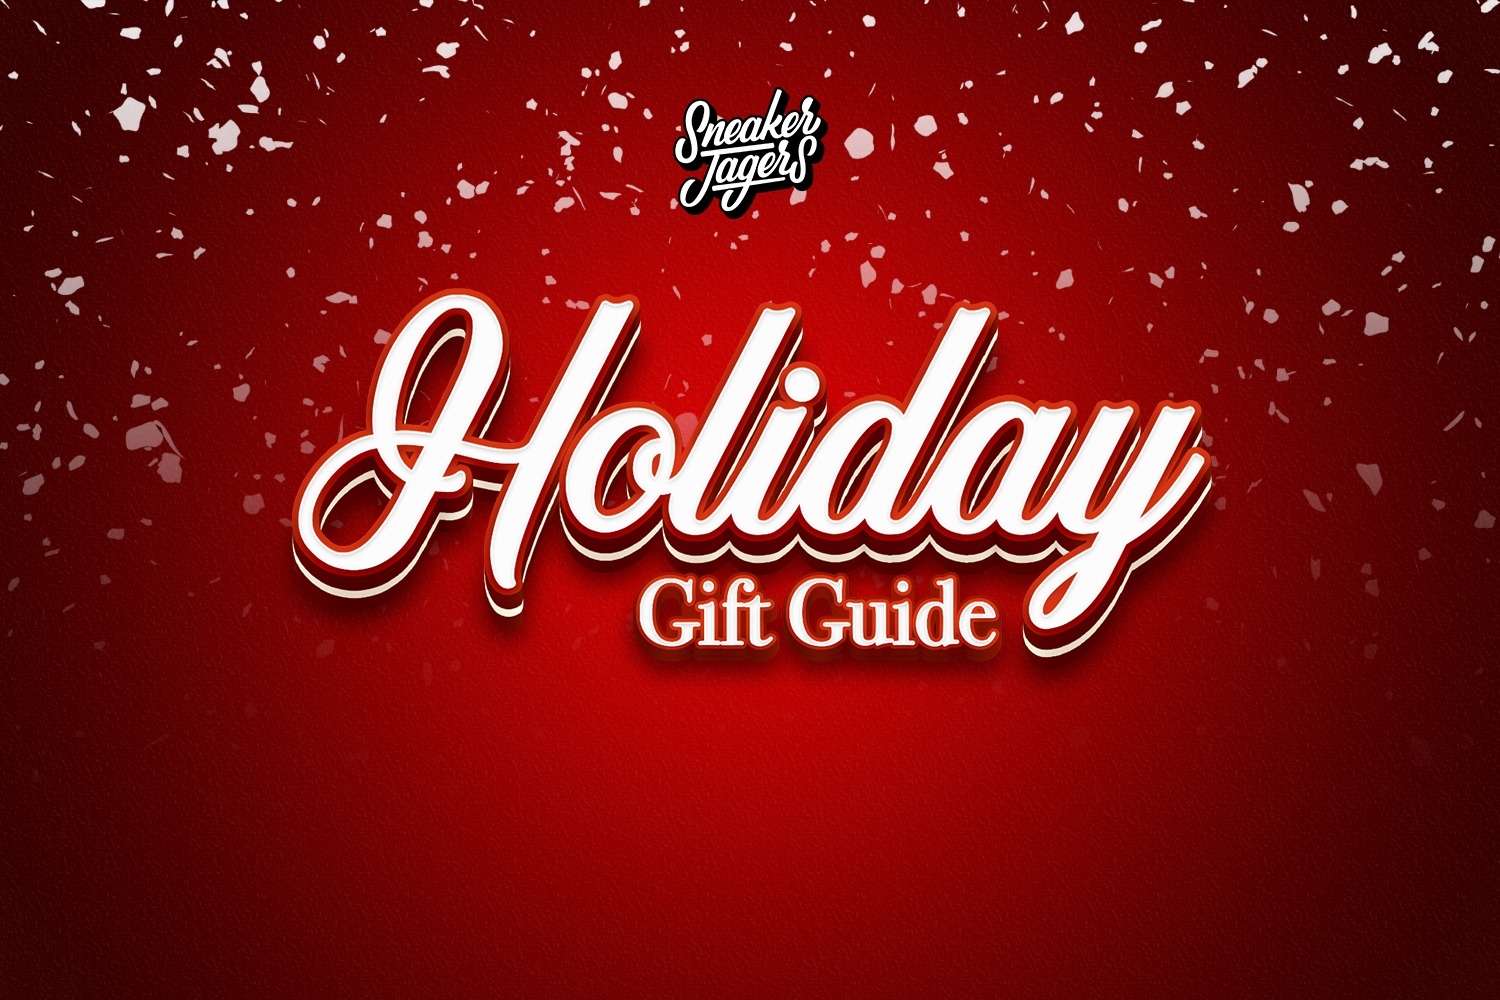 The Holiday Gift Guide from Sneakerjagers